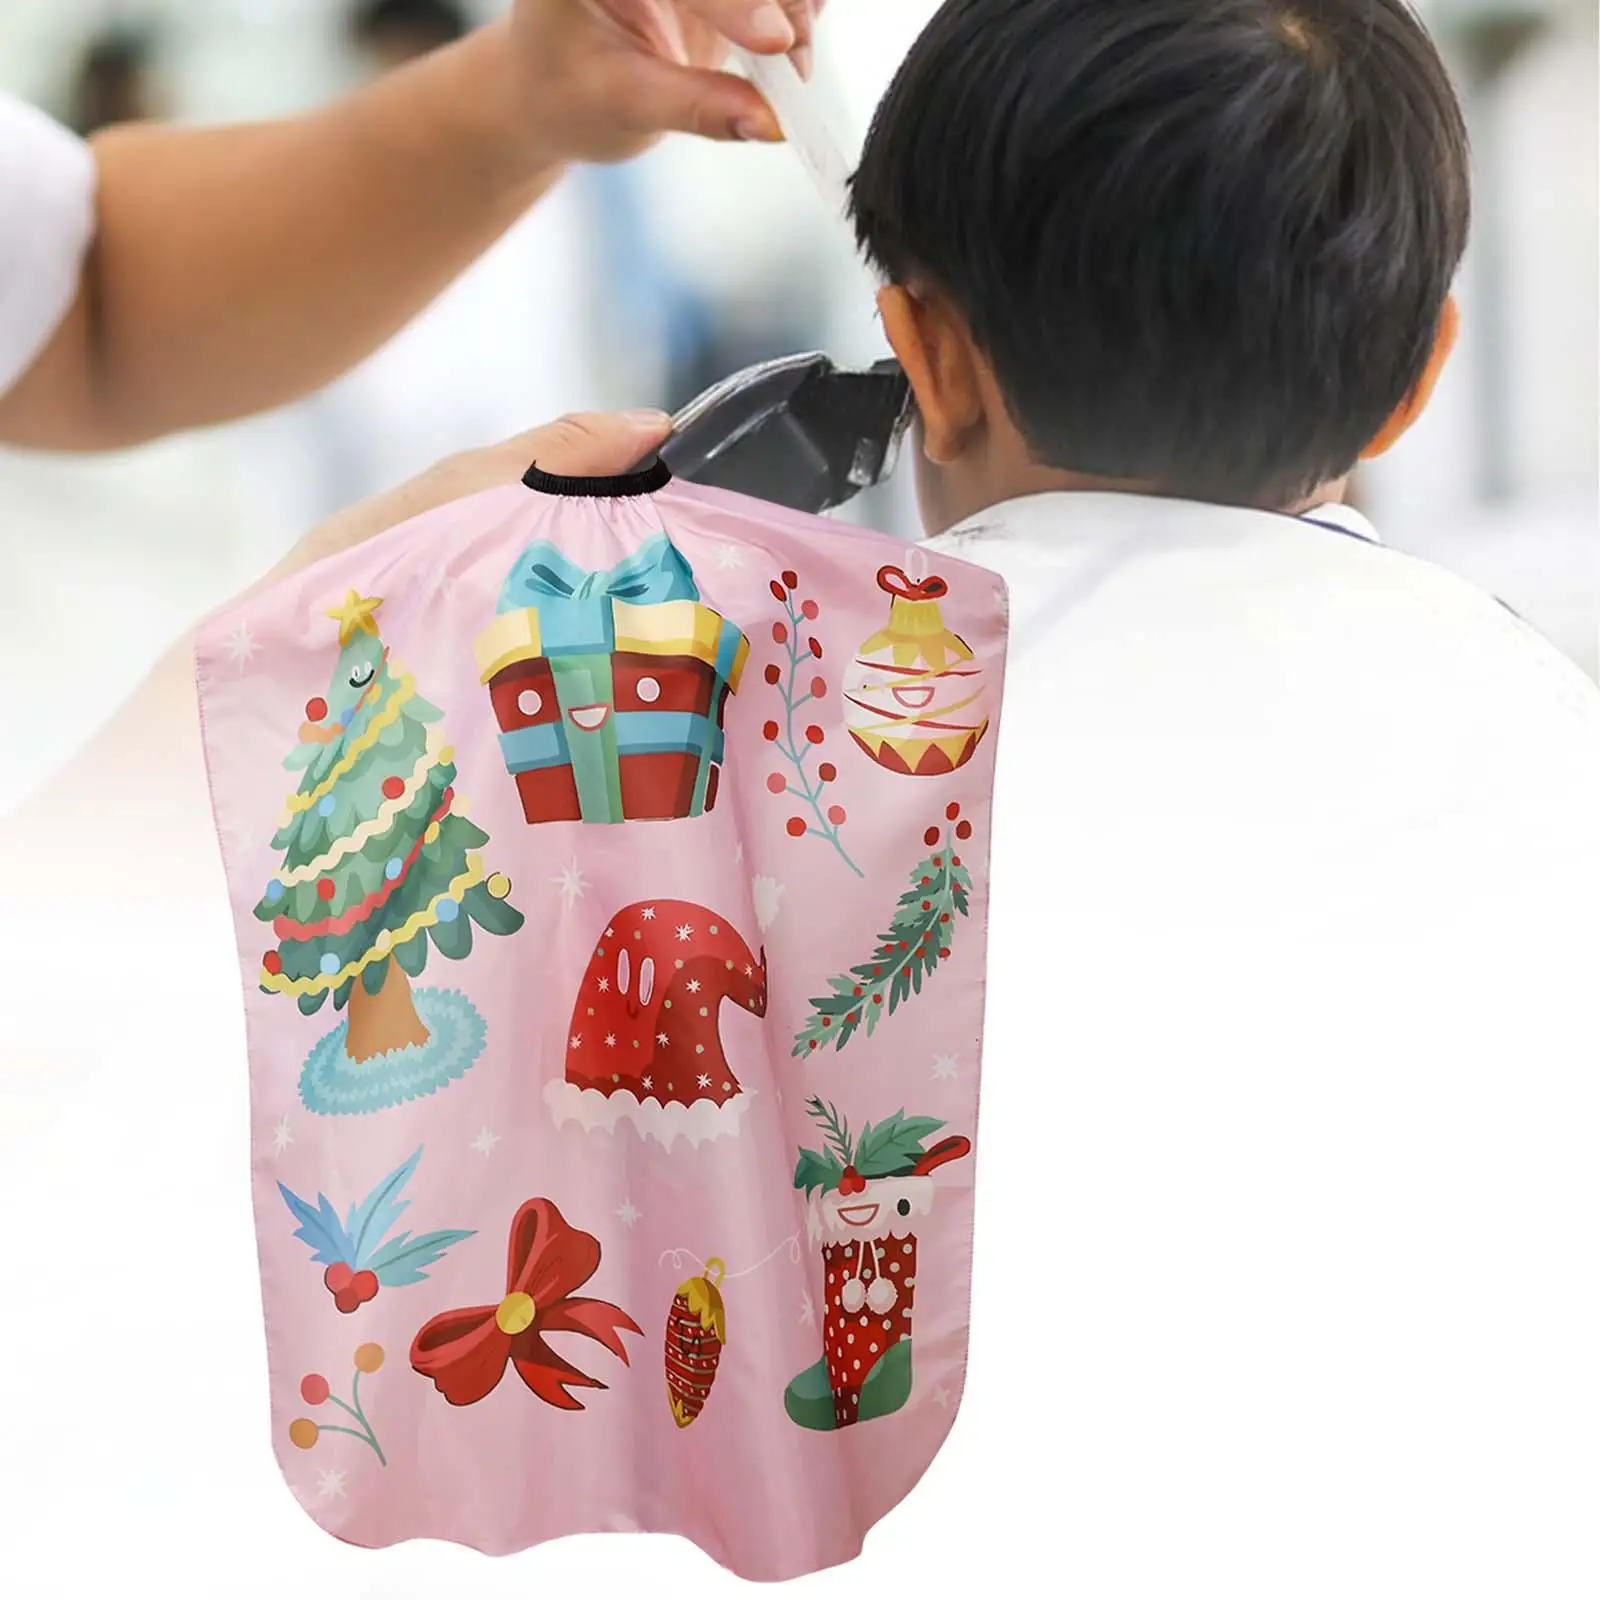 Child Hair Cutting Cape Easy to Lock Metal Clip Waterproof Cloth for Barber Shop with Adjustable Neckline Kids Haircut Cape